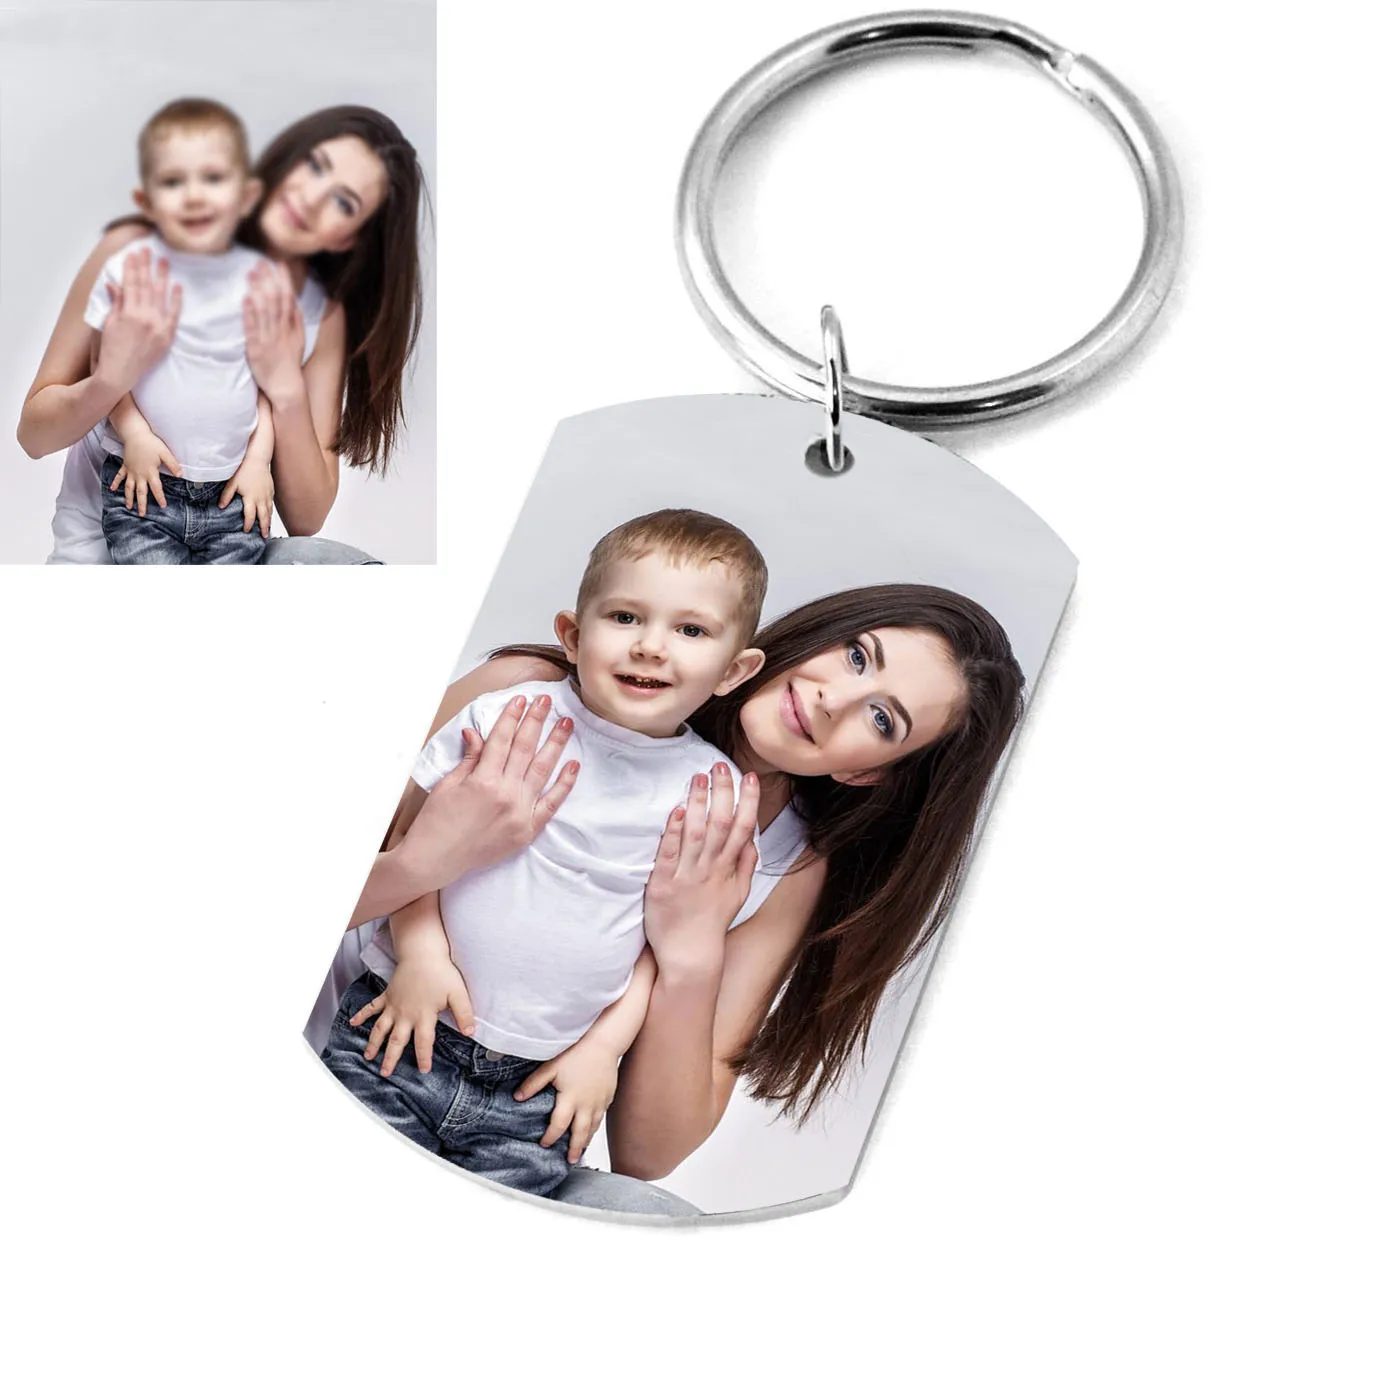 

Custom Photo Keychain,Engraved Photo Keychain,Personalizd Picture Keychain for Boyfriend Husband,Valentines Gift,Gift for Couple